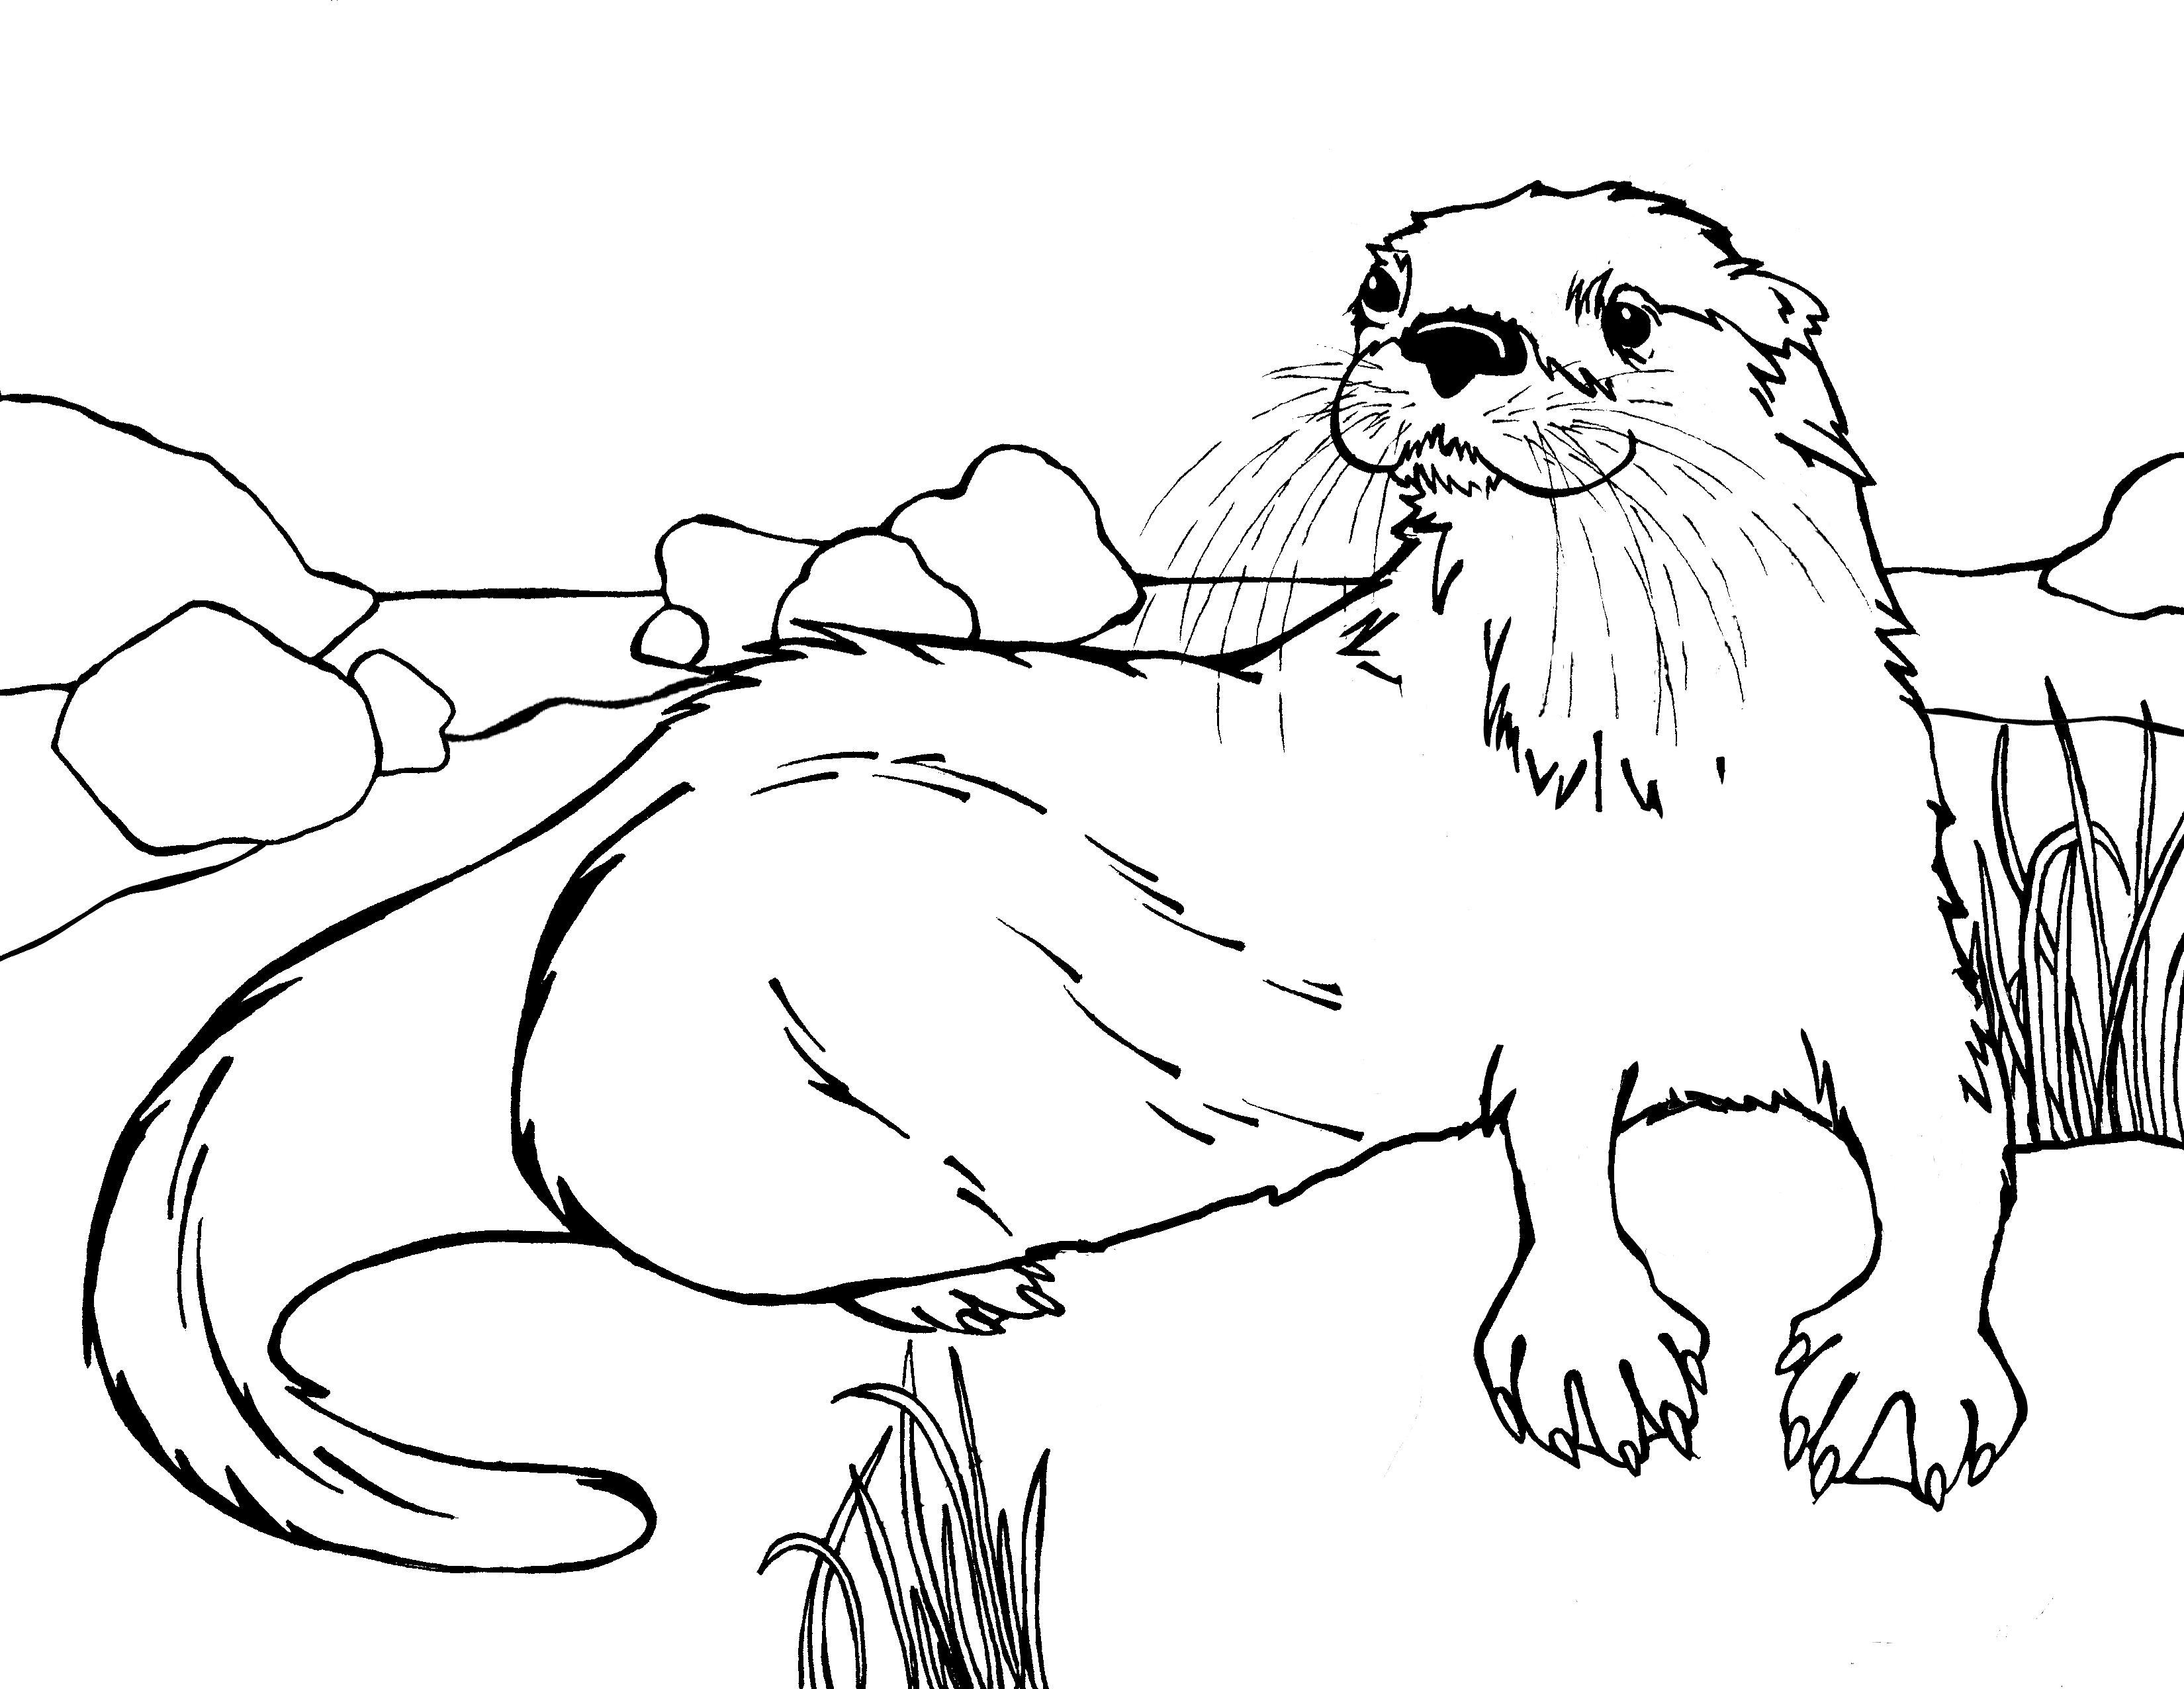 Otter Coloring Pages - Best Coloring Pages For Kids